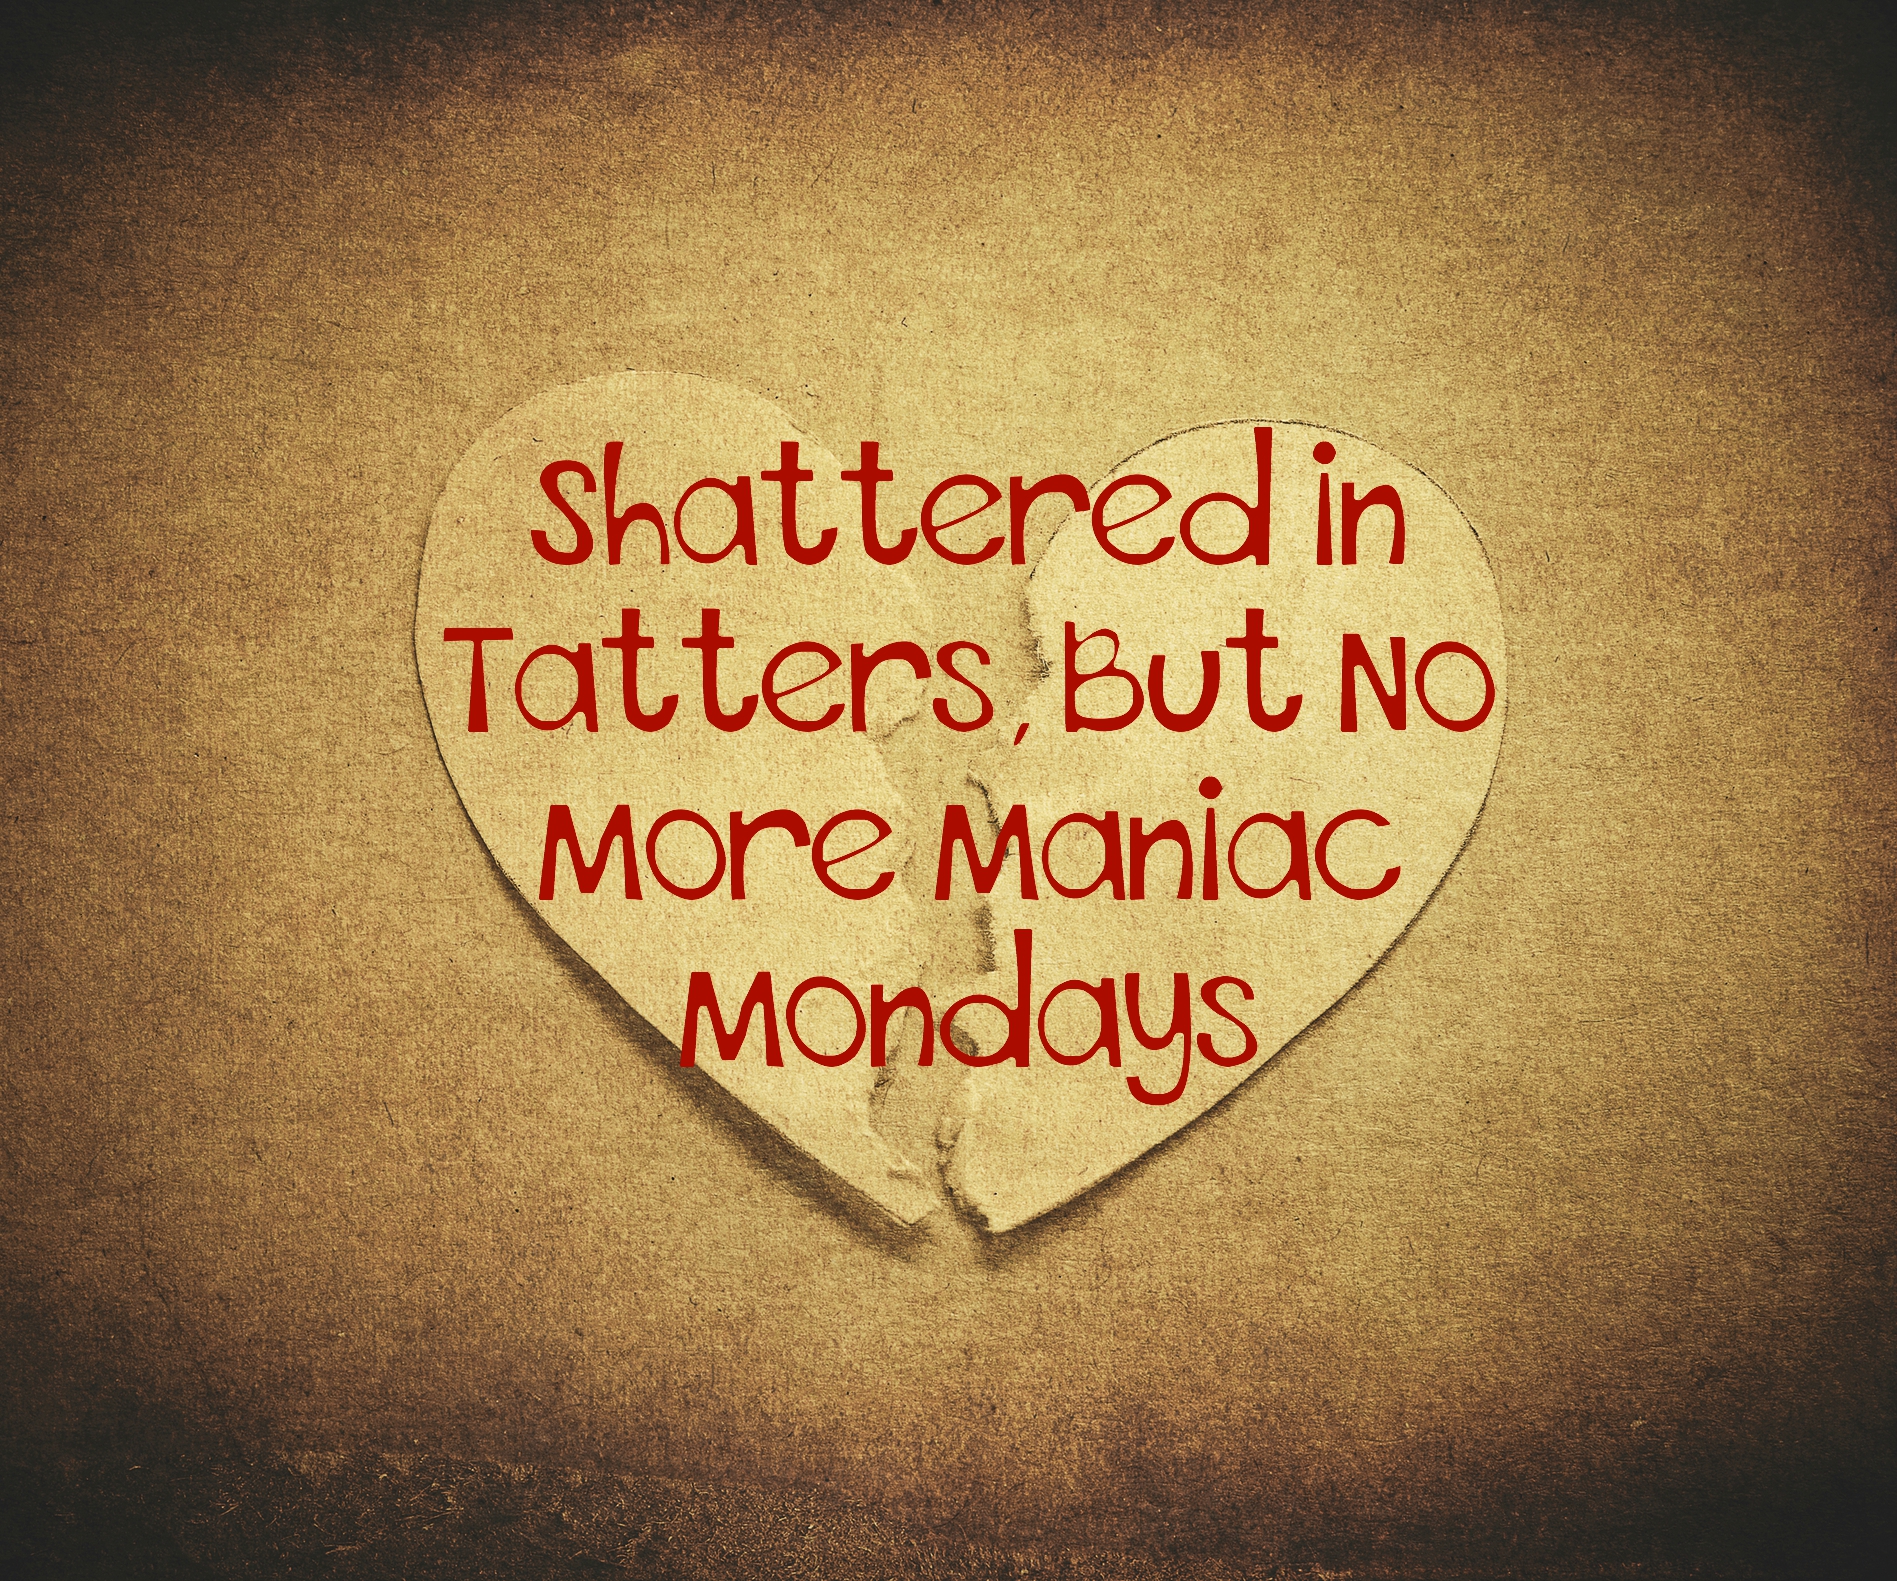 Shattered in Tatters, But No More Maniac Mondays